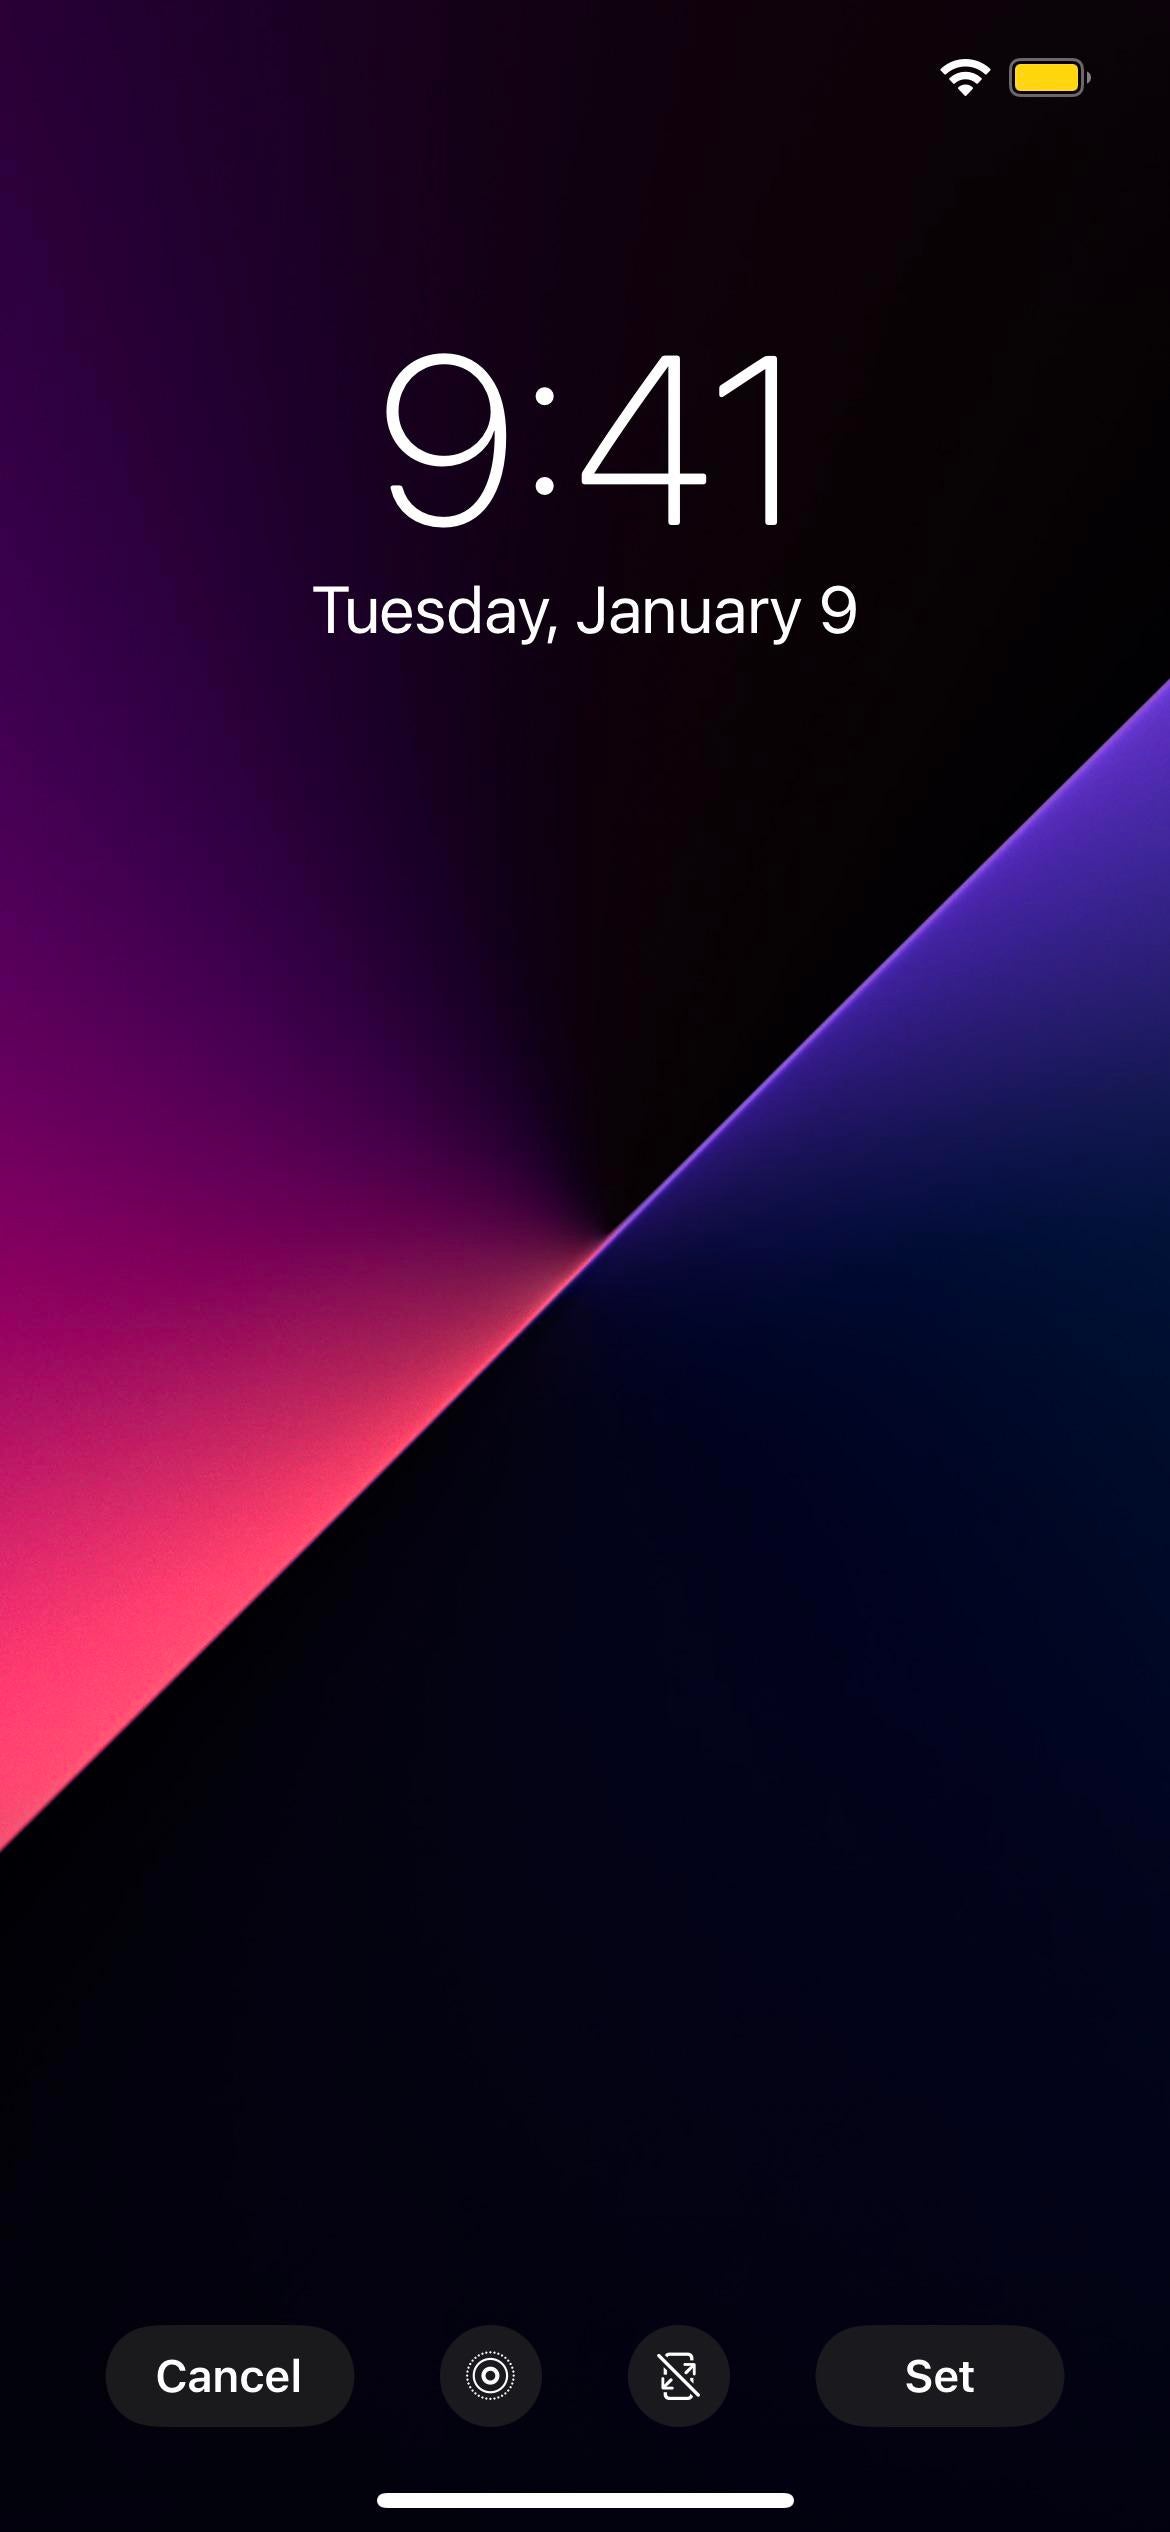 Does Anybody Have The End Of Live Wallpaper For Black